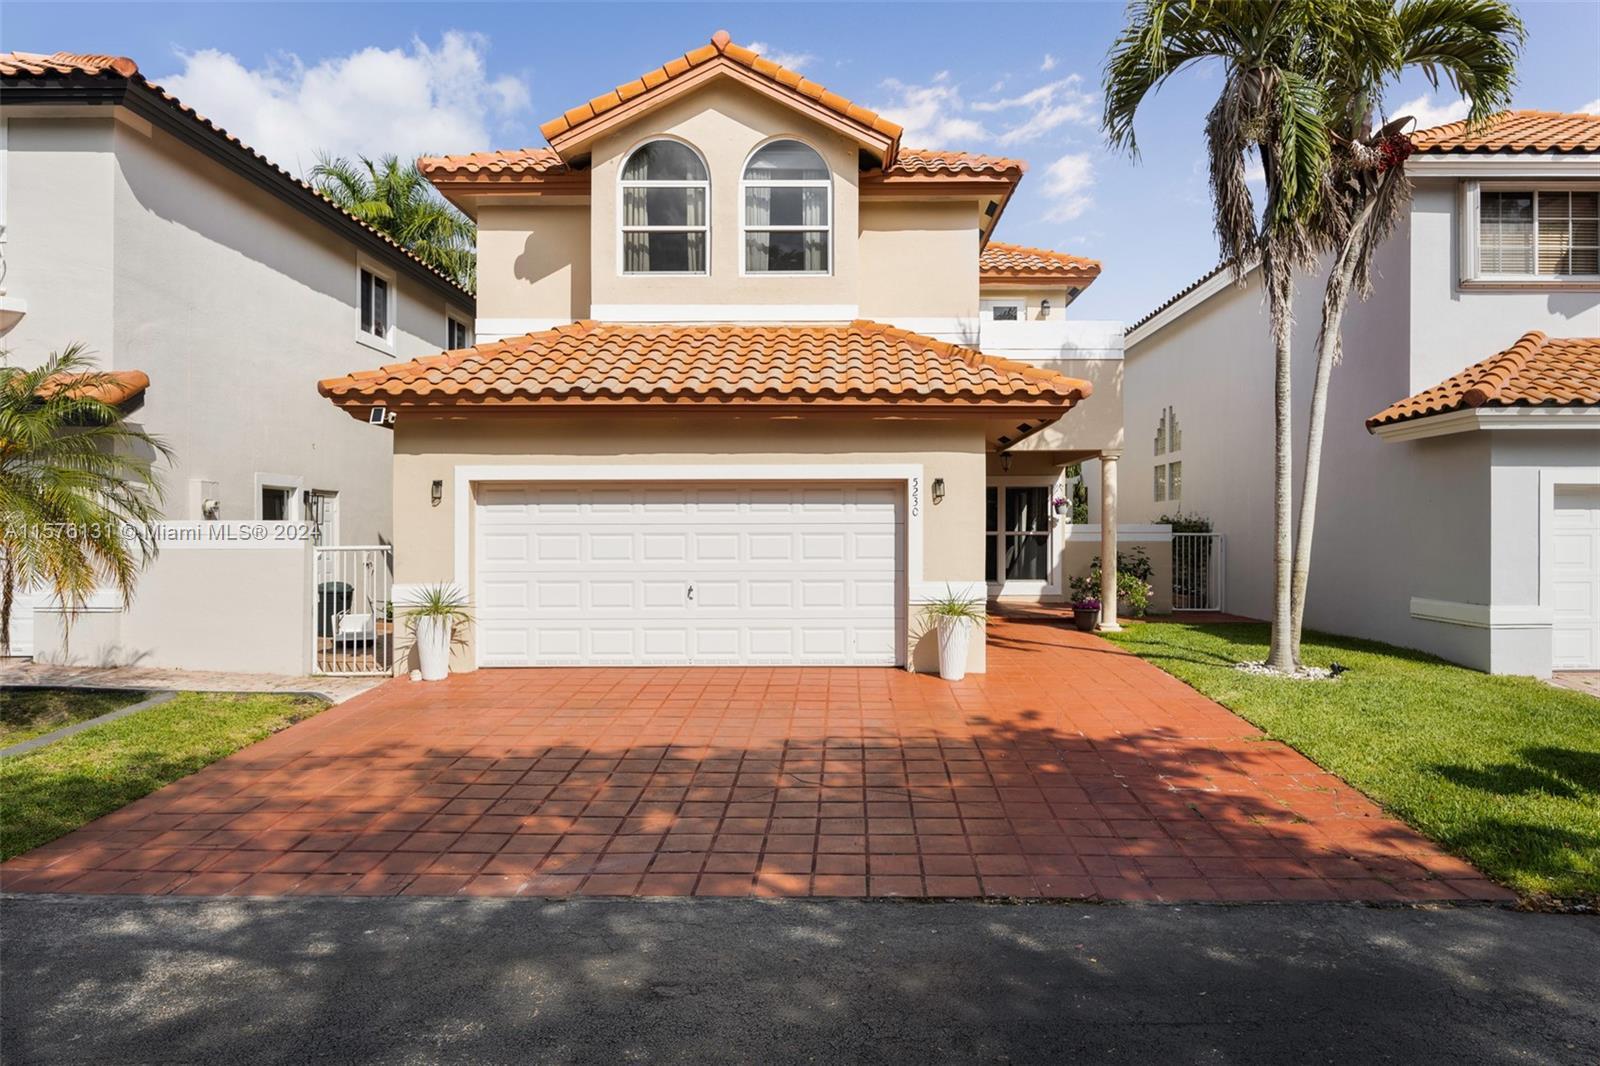 This stunning, furnished single-family home in gated Doral Palms Estates boasts modern elegance and 